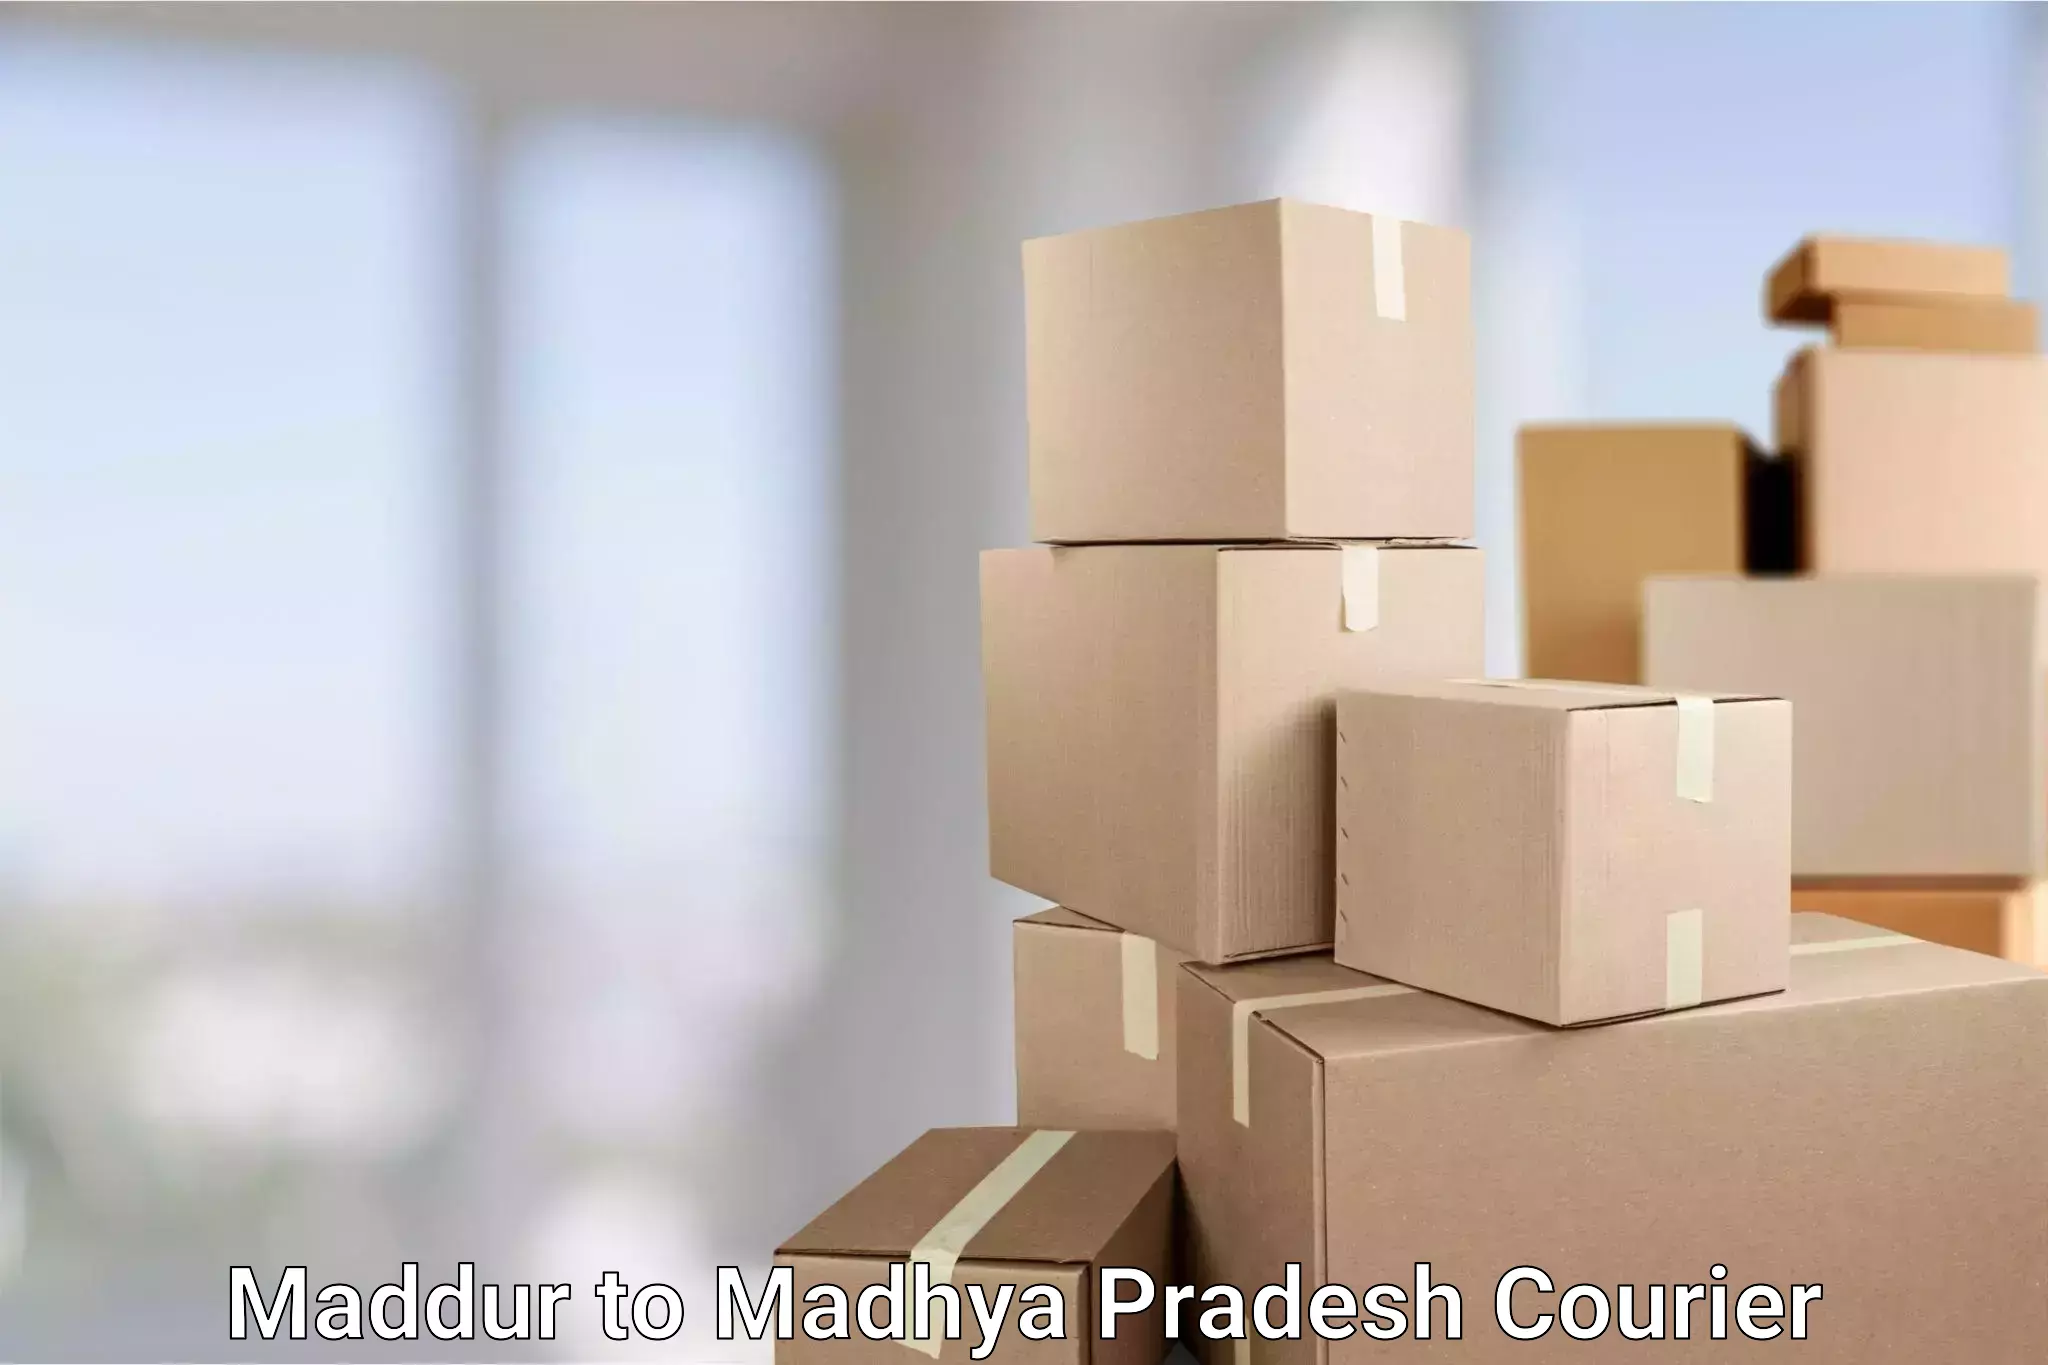 Reliable delivery network in Maddur to Madhya Pradesh